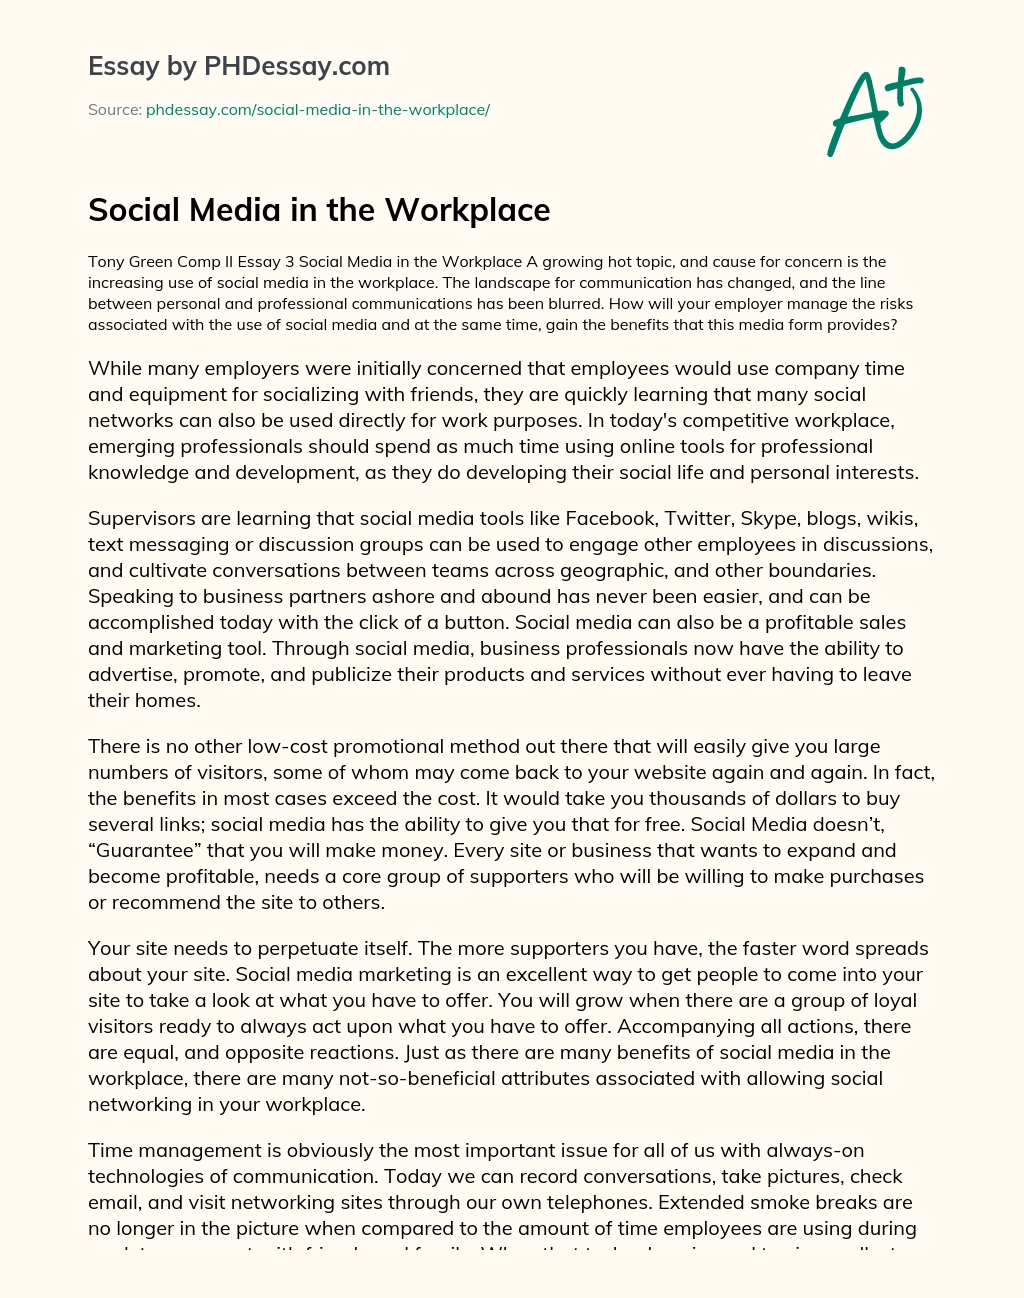 Social Media in the Workplace essay